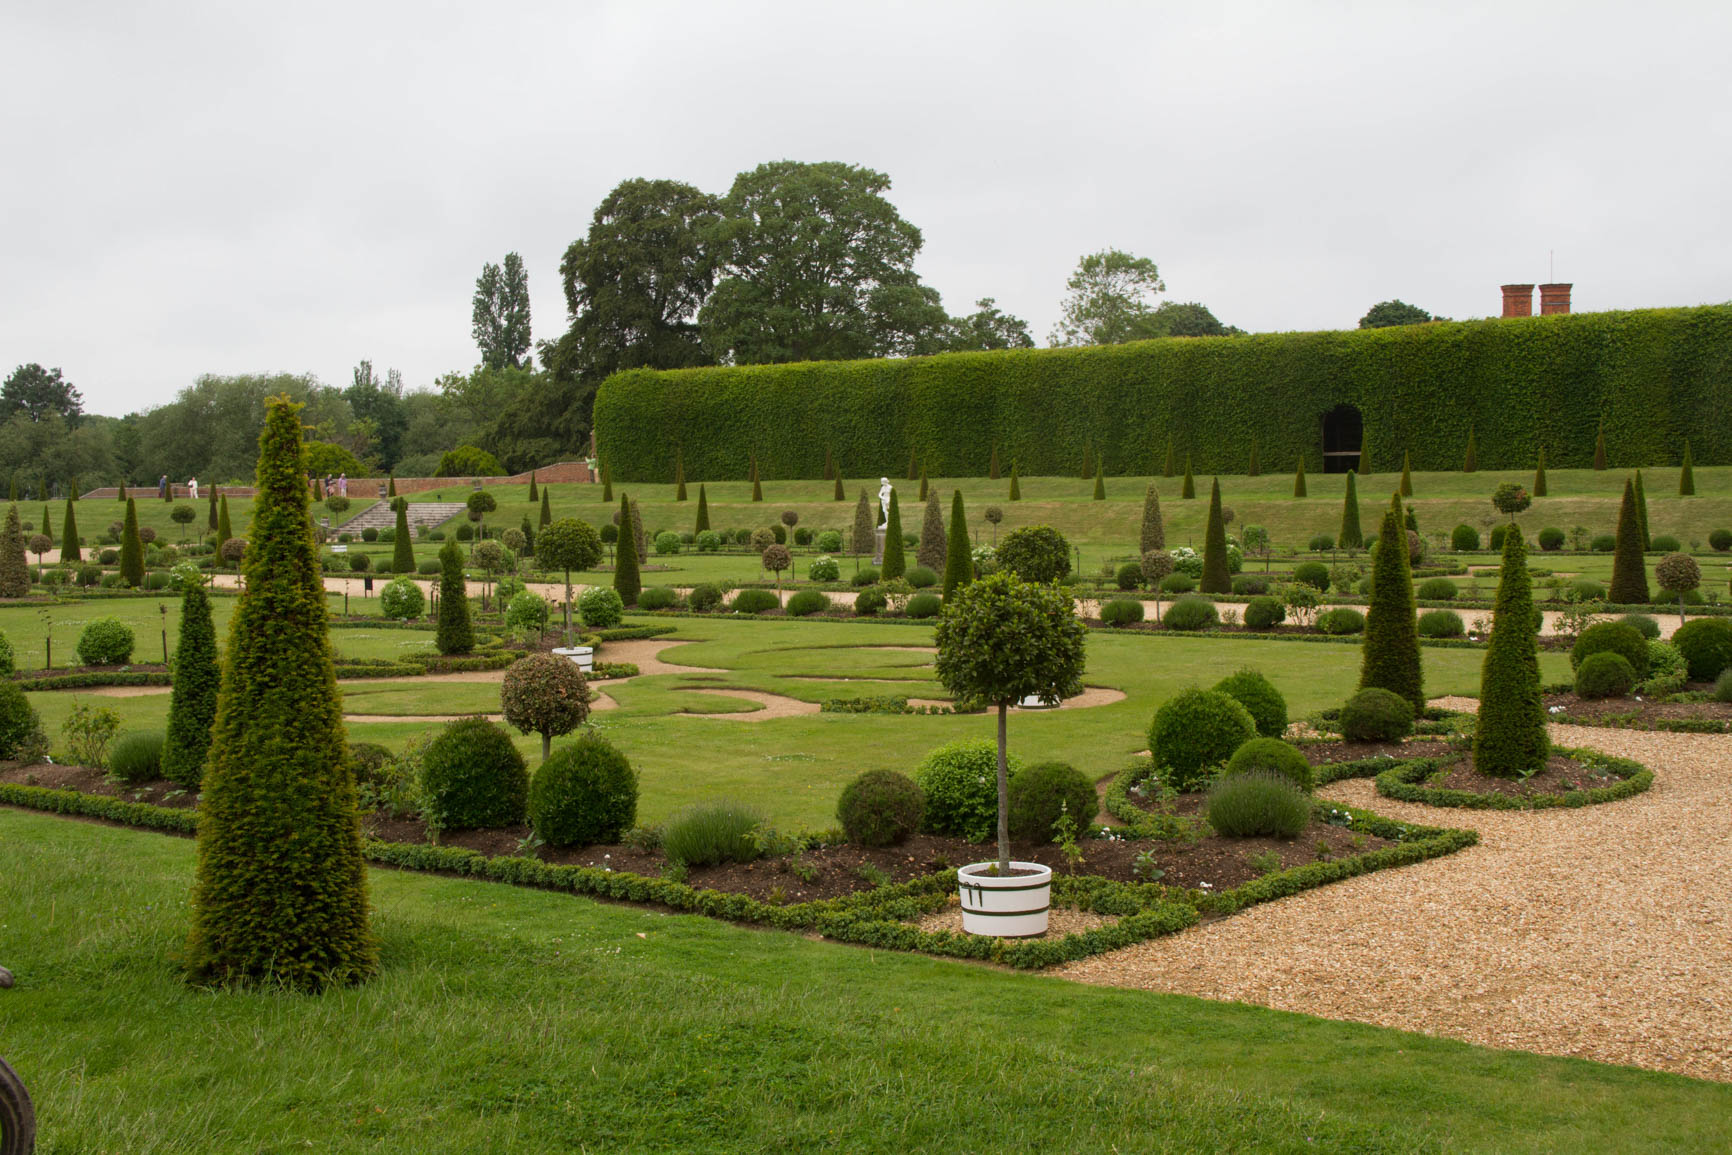 The 17th century-style garden at Hampton Court Palace features cones, balls and other geometric shapes. 